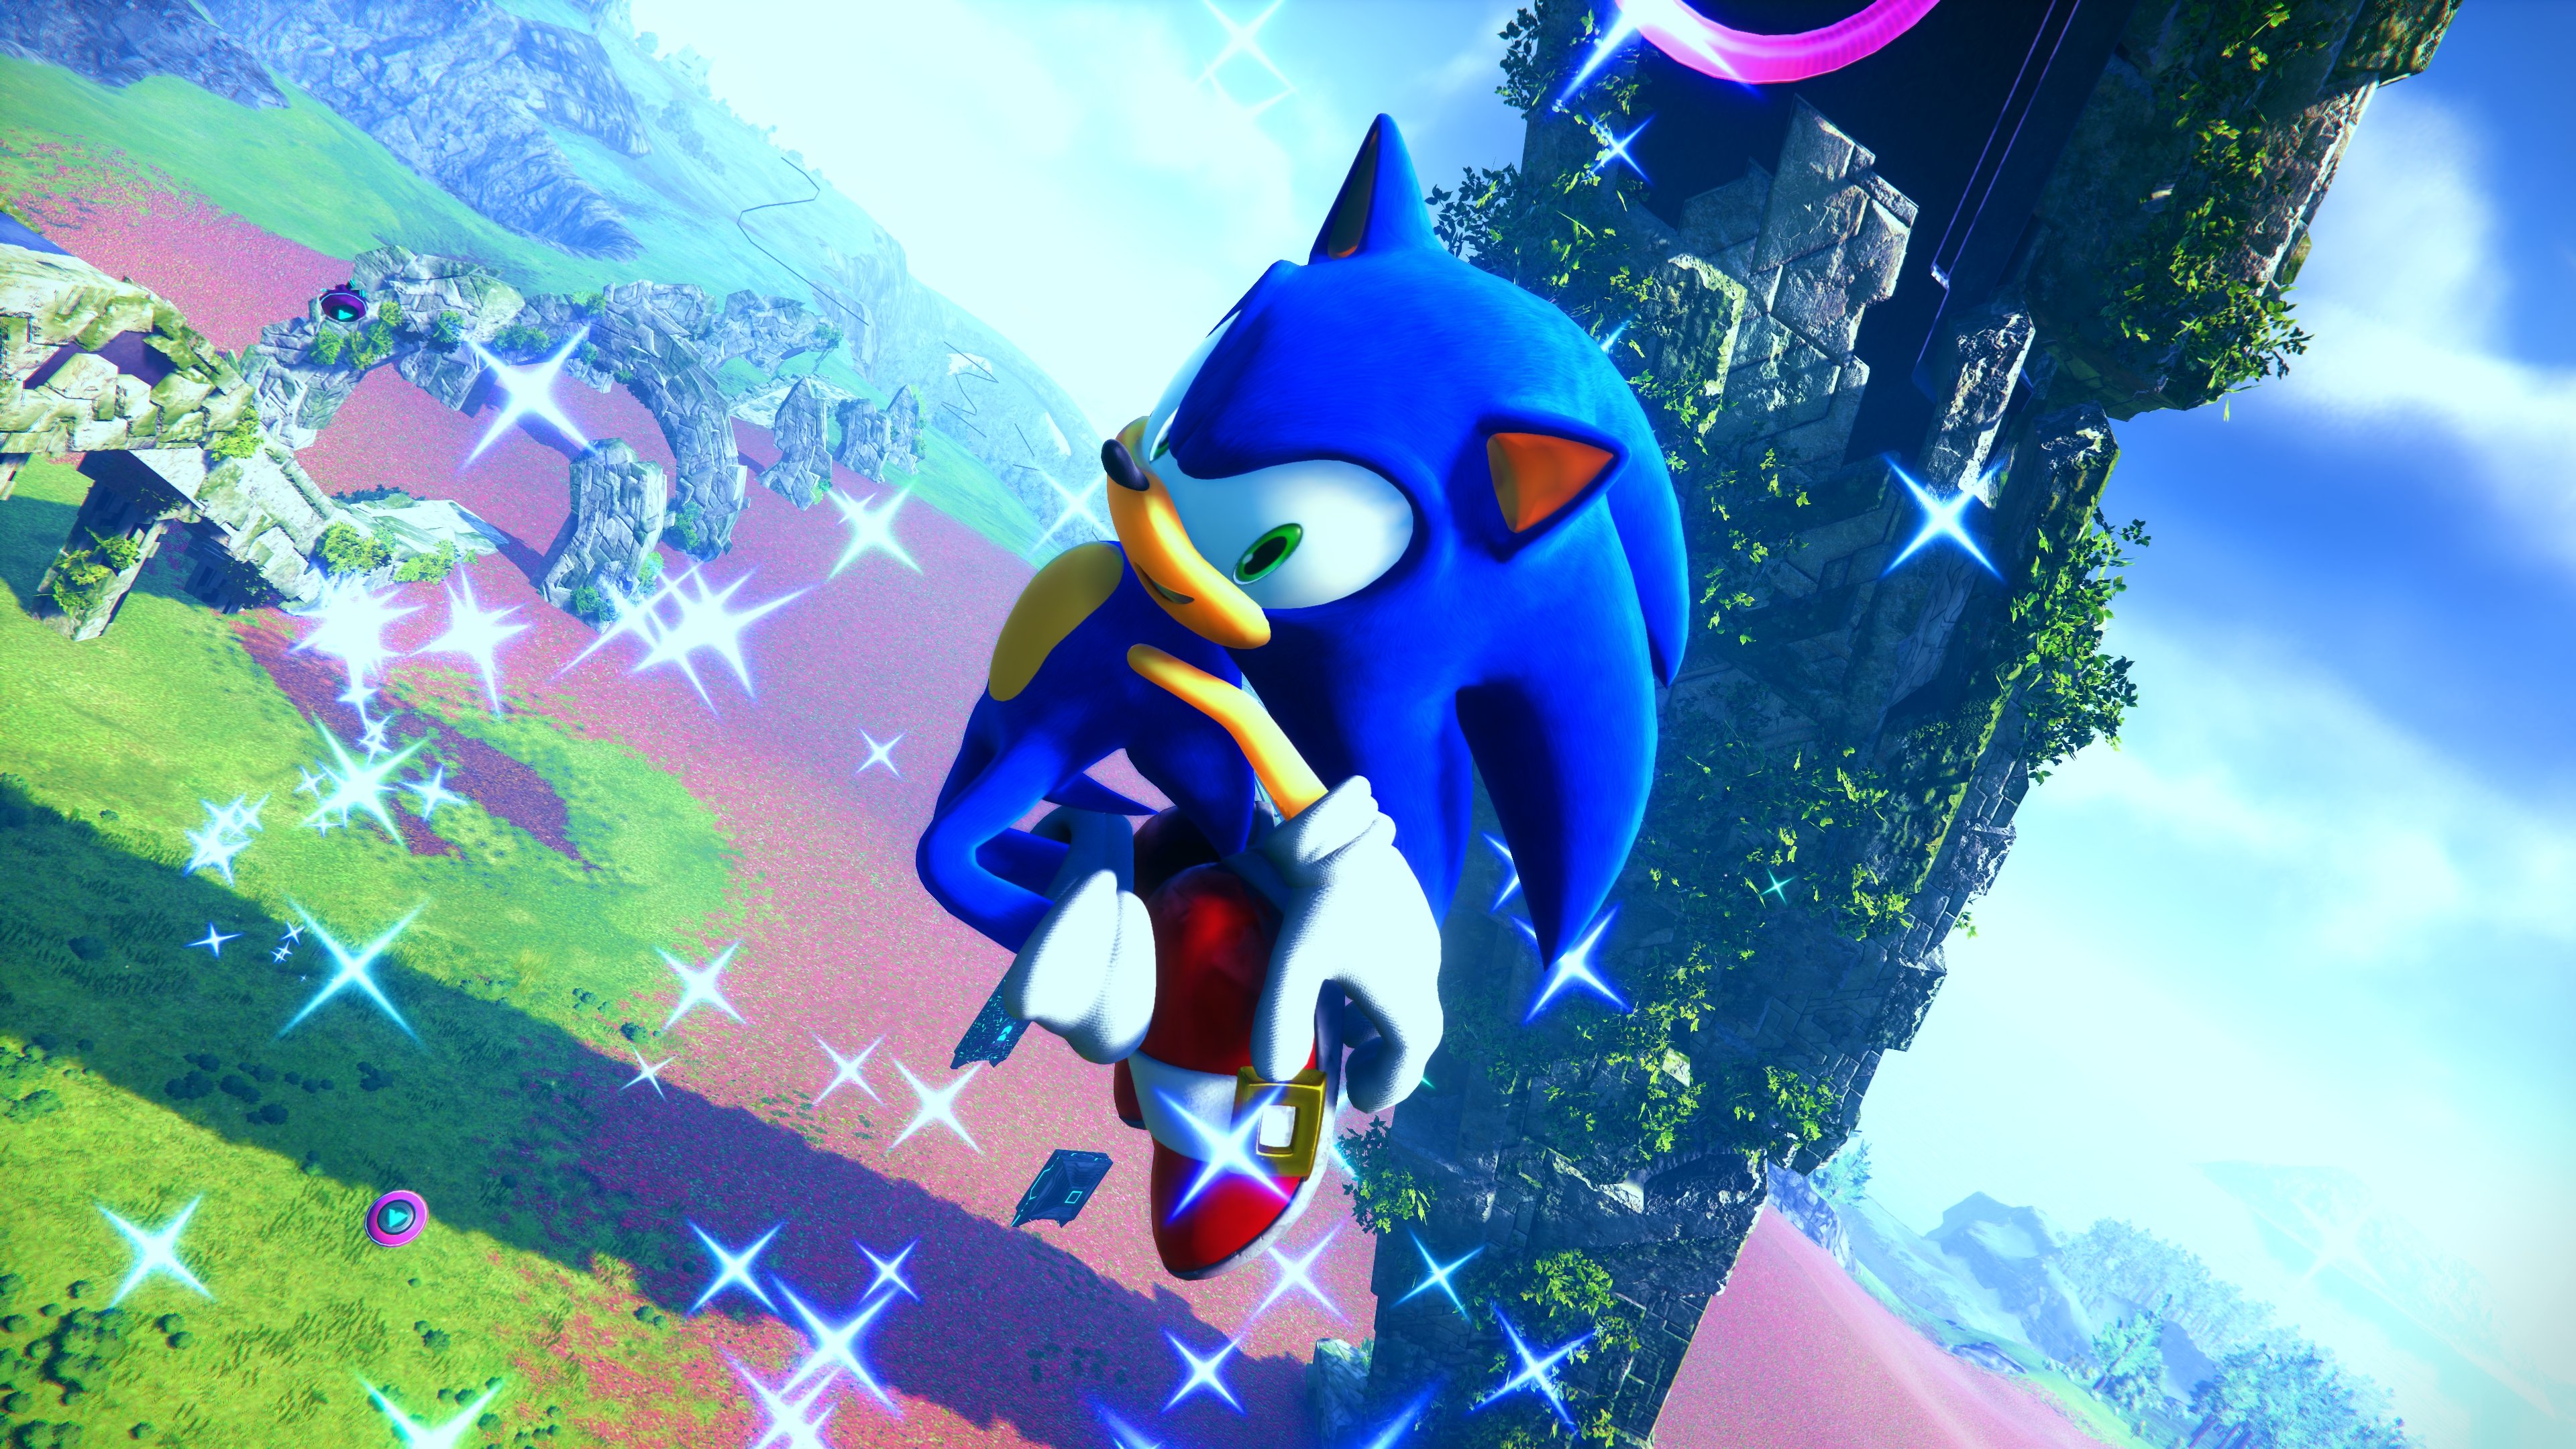 Fan Made 'Sonic Utopia' Game Now Available for Download